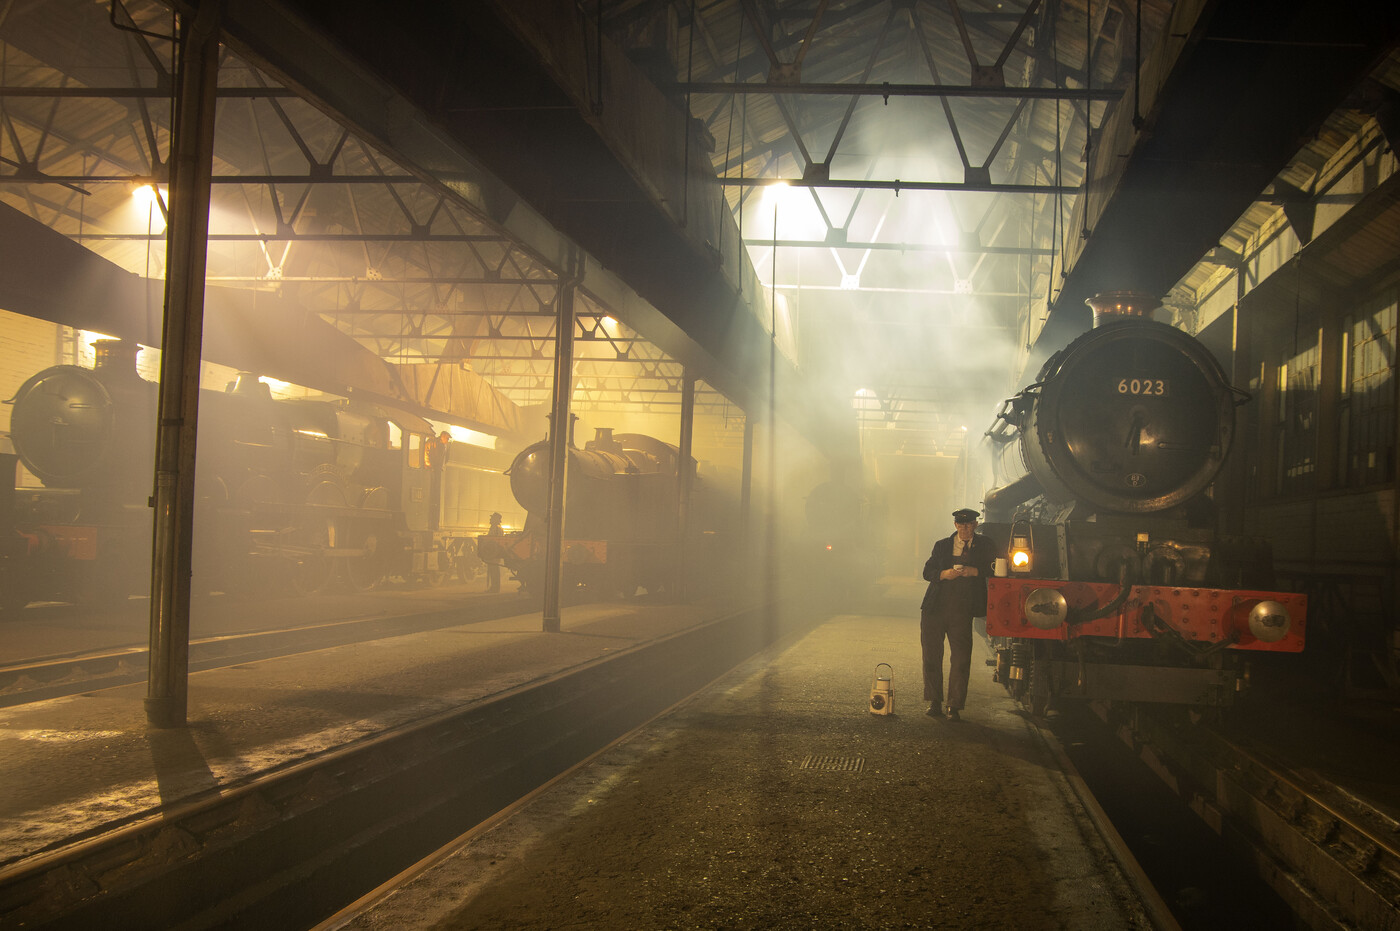 photographer David Blandford Photography uncategorized  photo taken at Great Western Society, Didcot